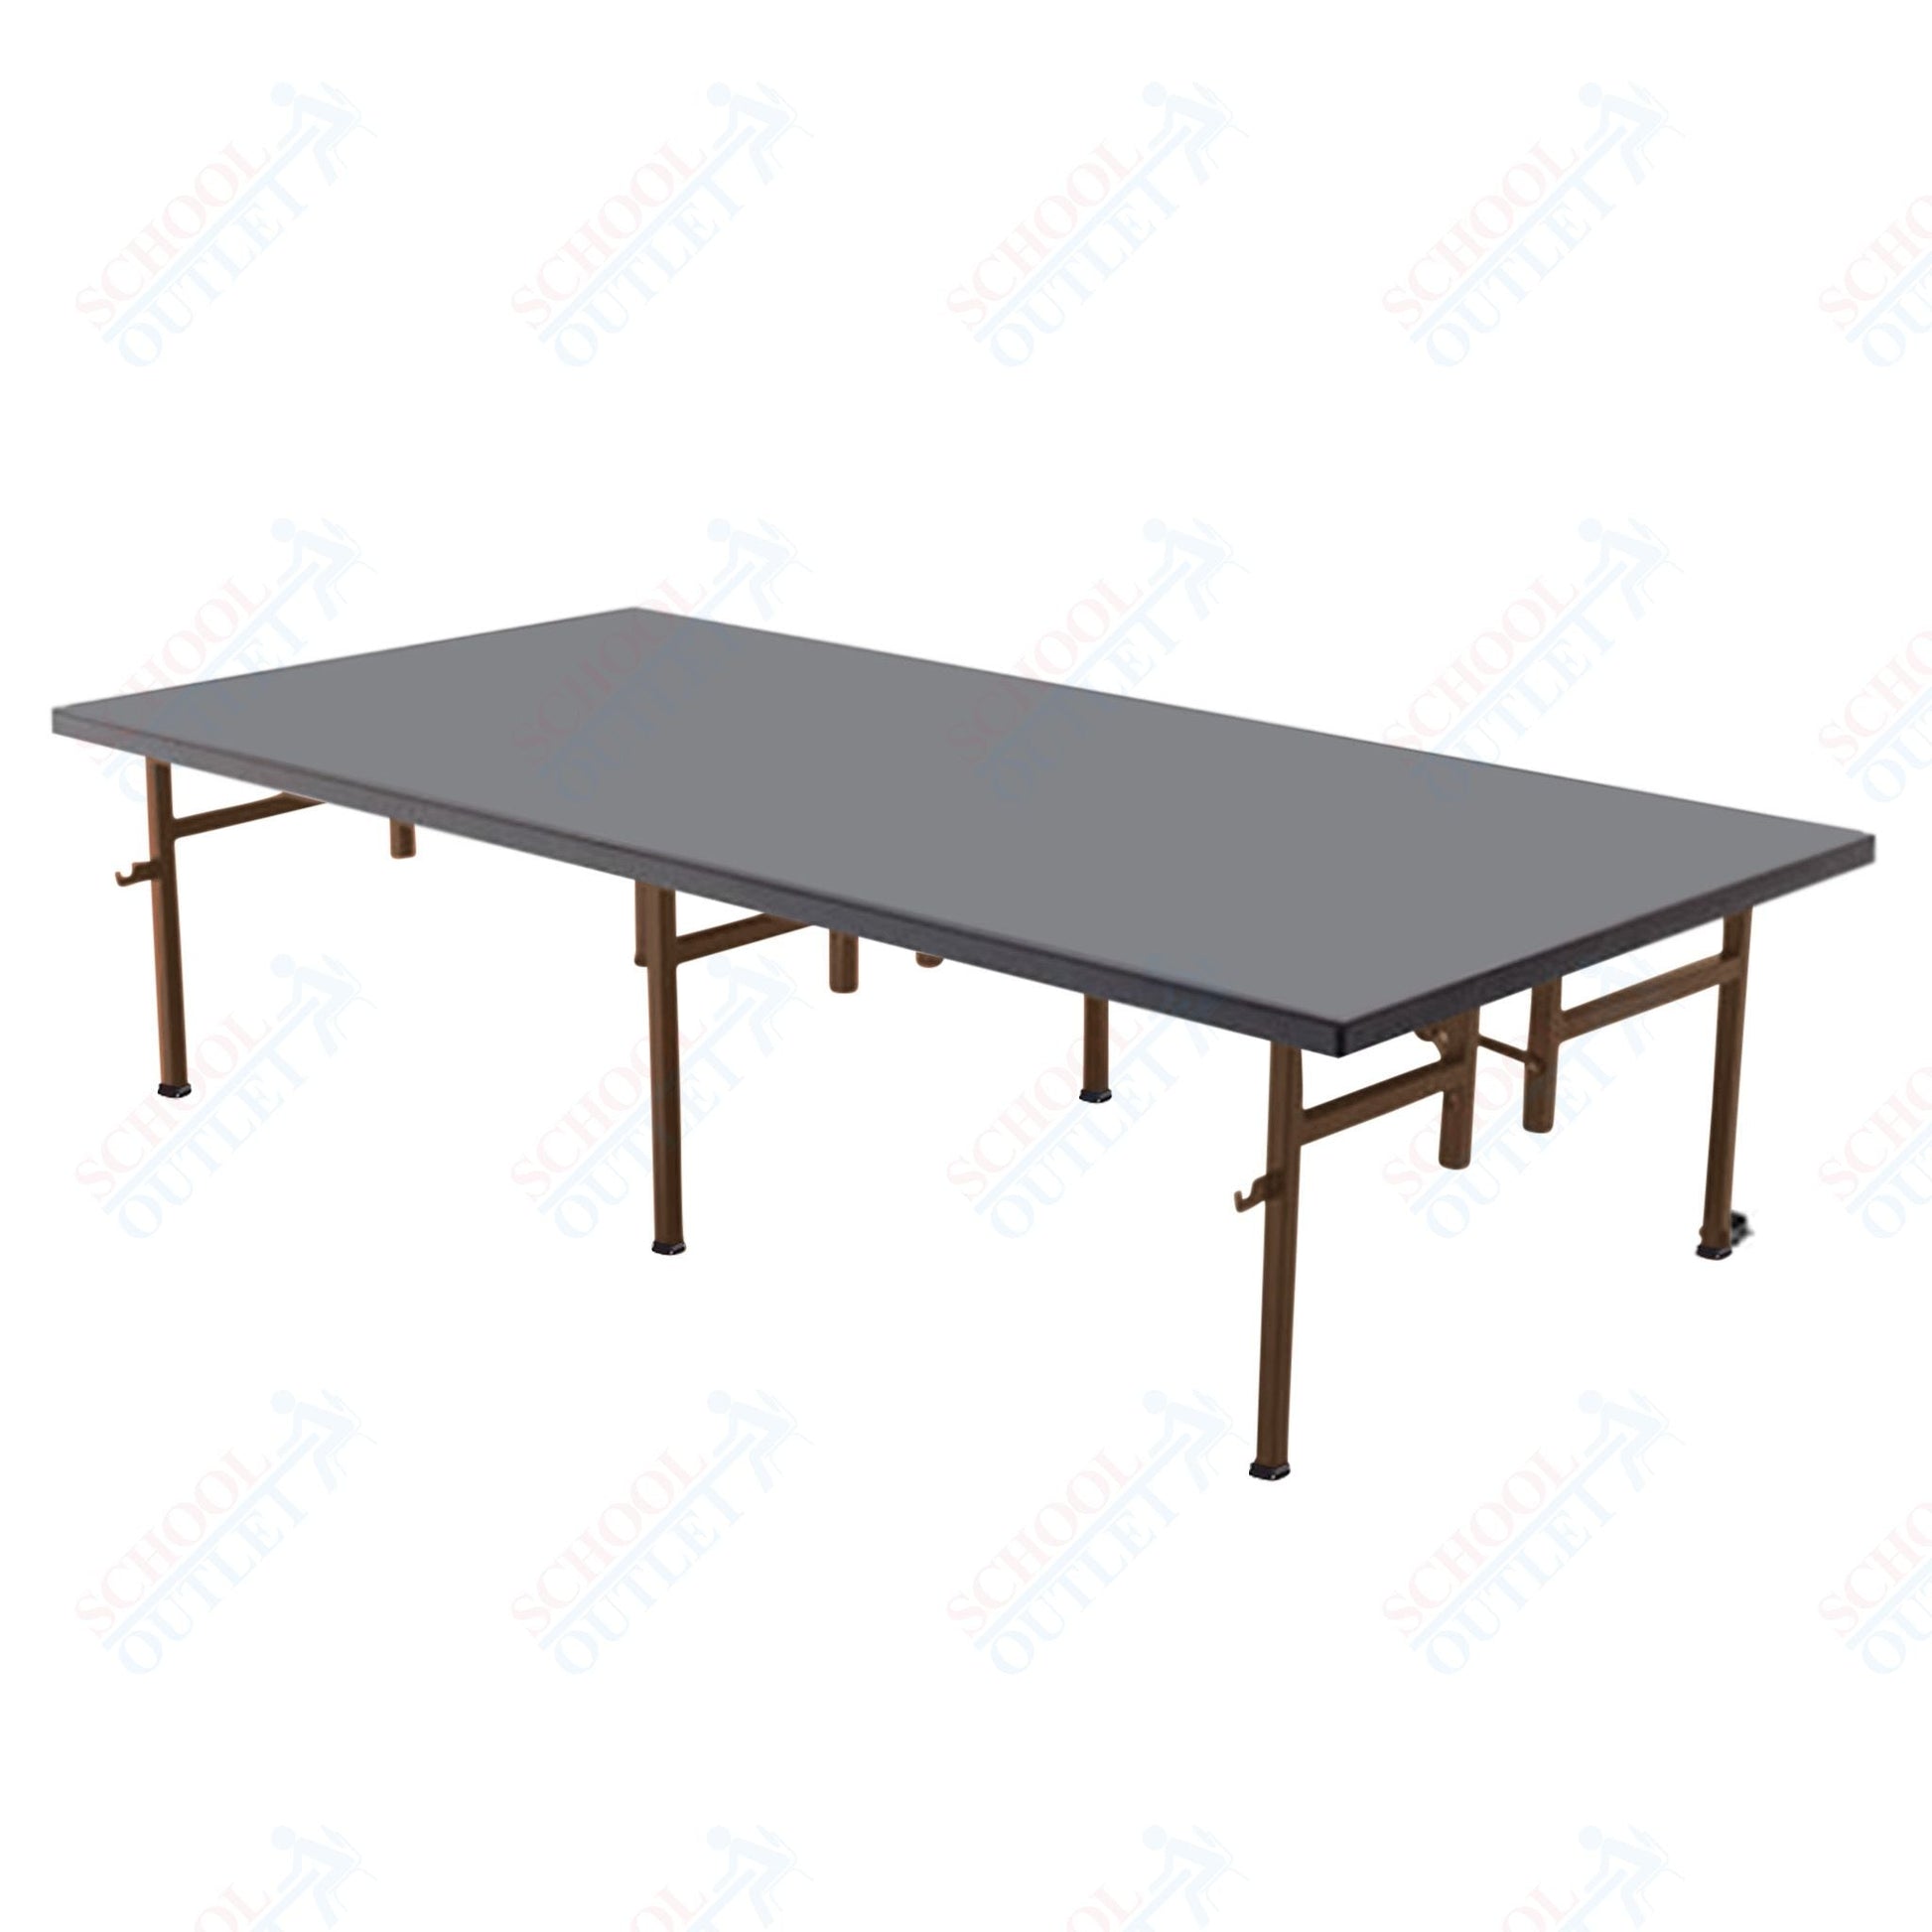 AmTab Fixed Height Stage - Polypropylene Top - 36"W x 96"L x 32"H (AmTab AMT - ST3832P) - SchoolOutlet